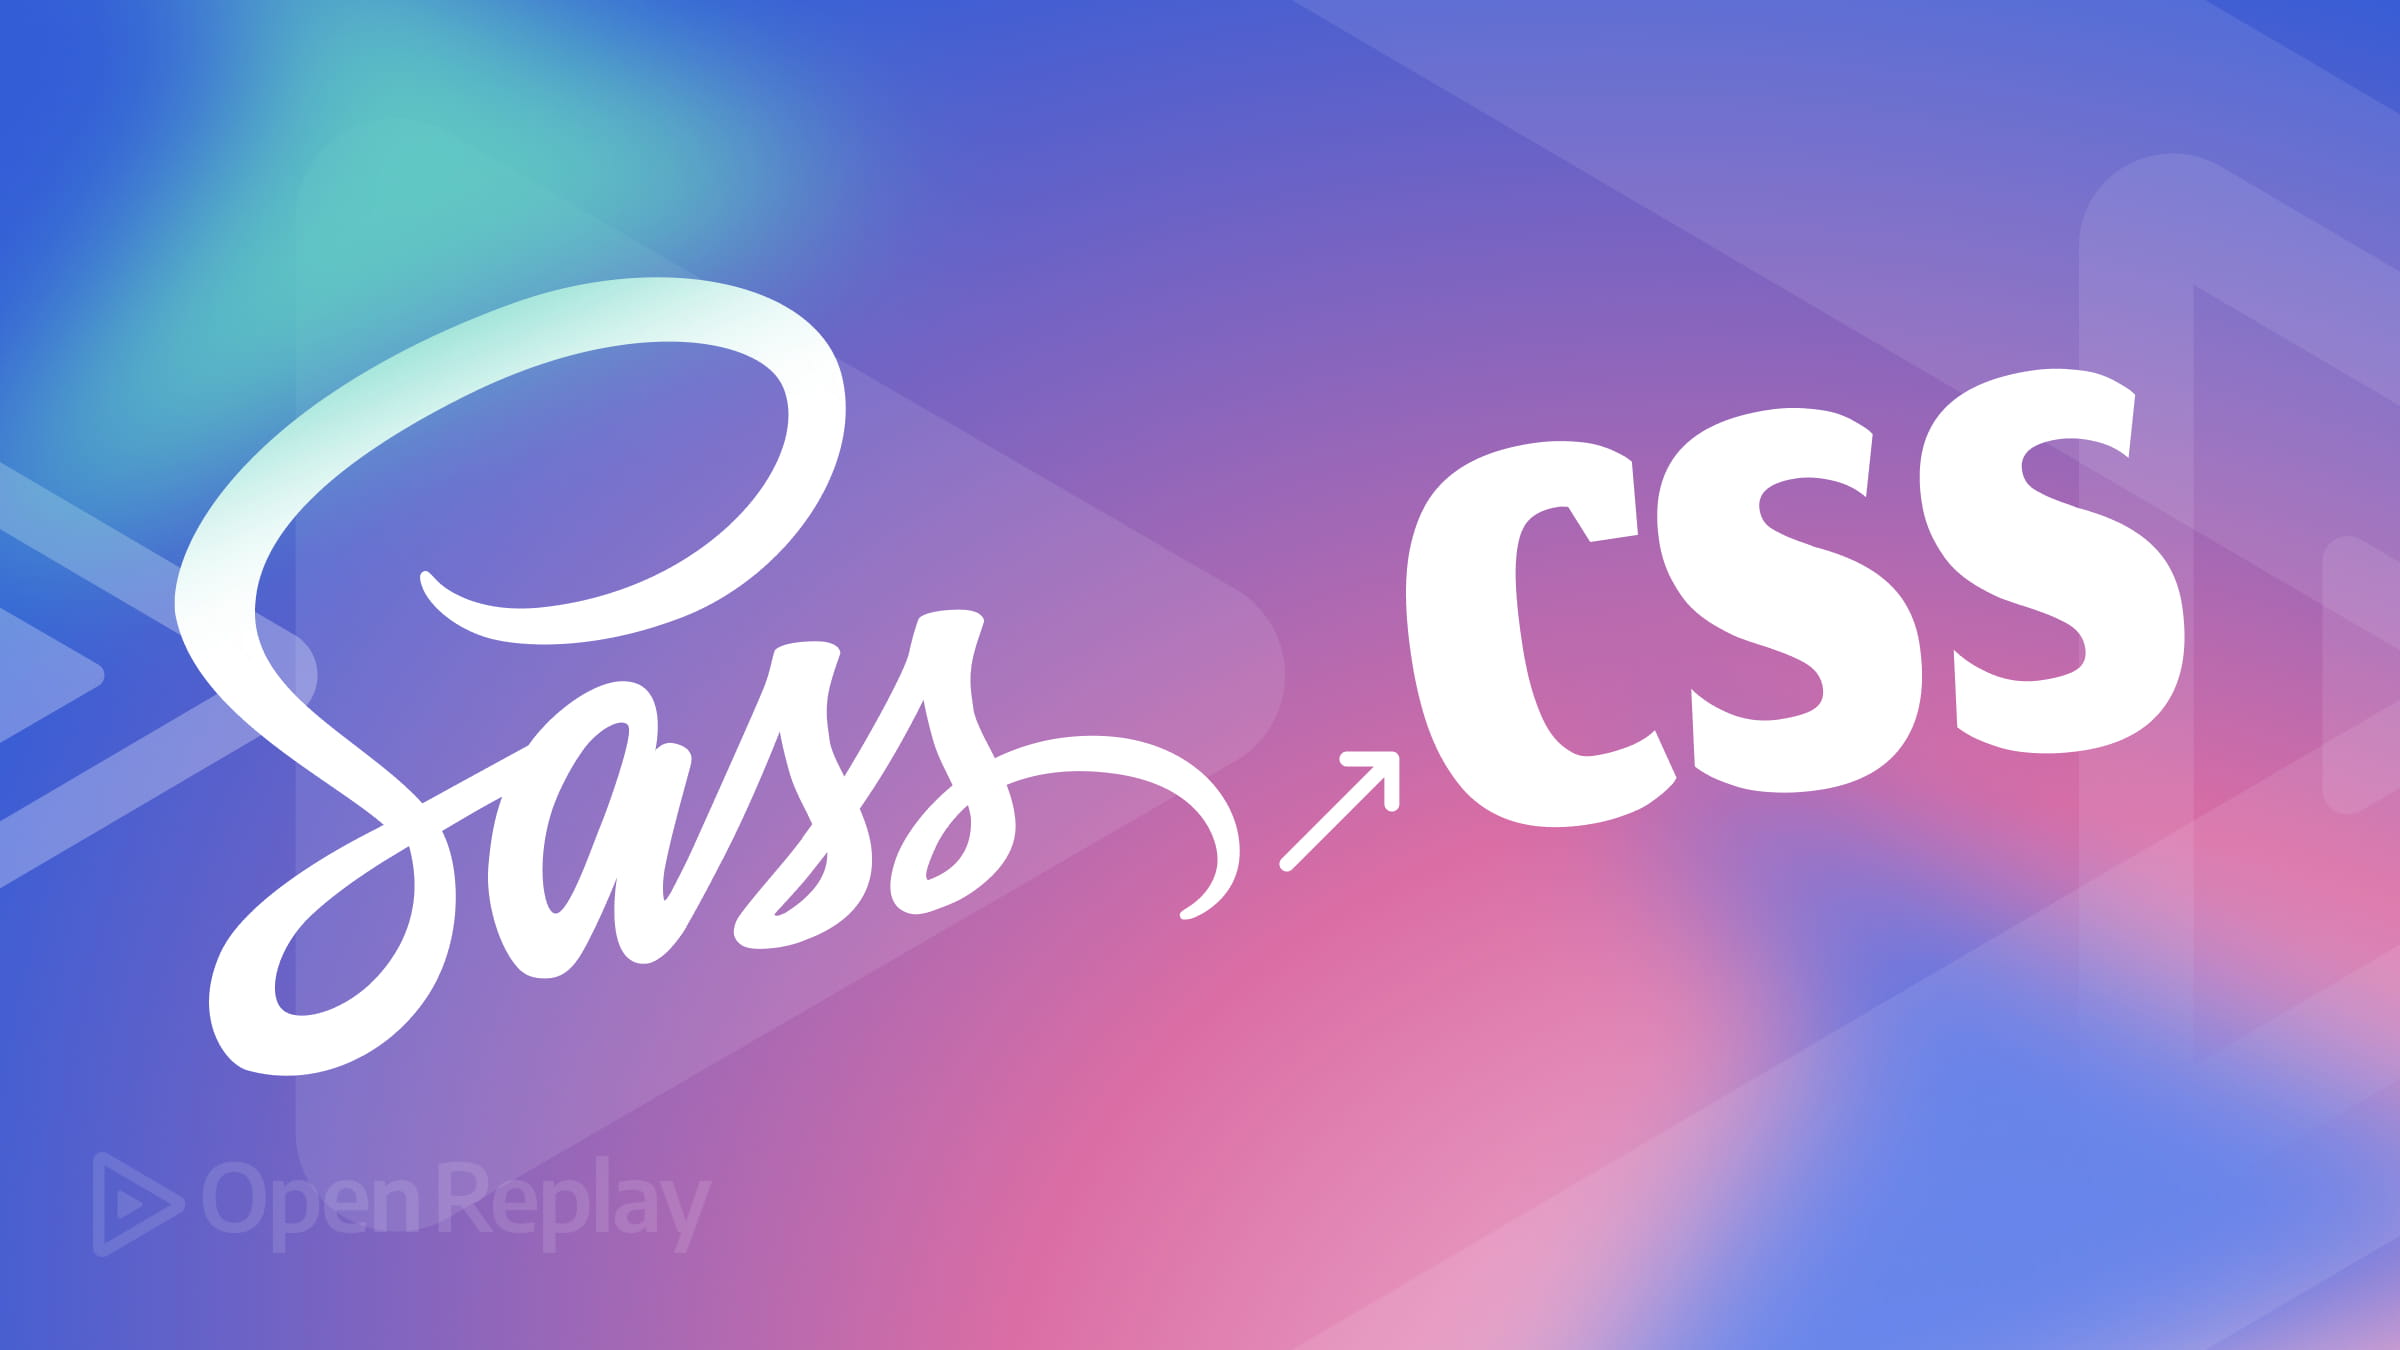 SASS or Native CSS? A Comparison